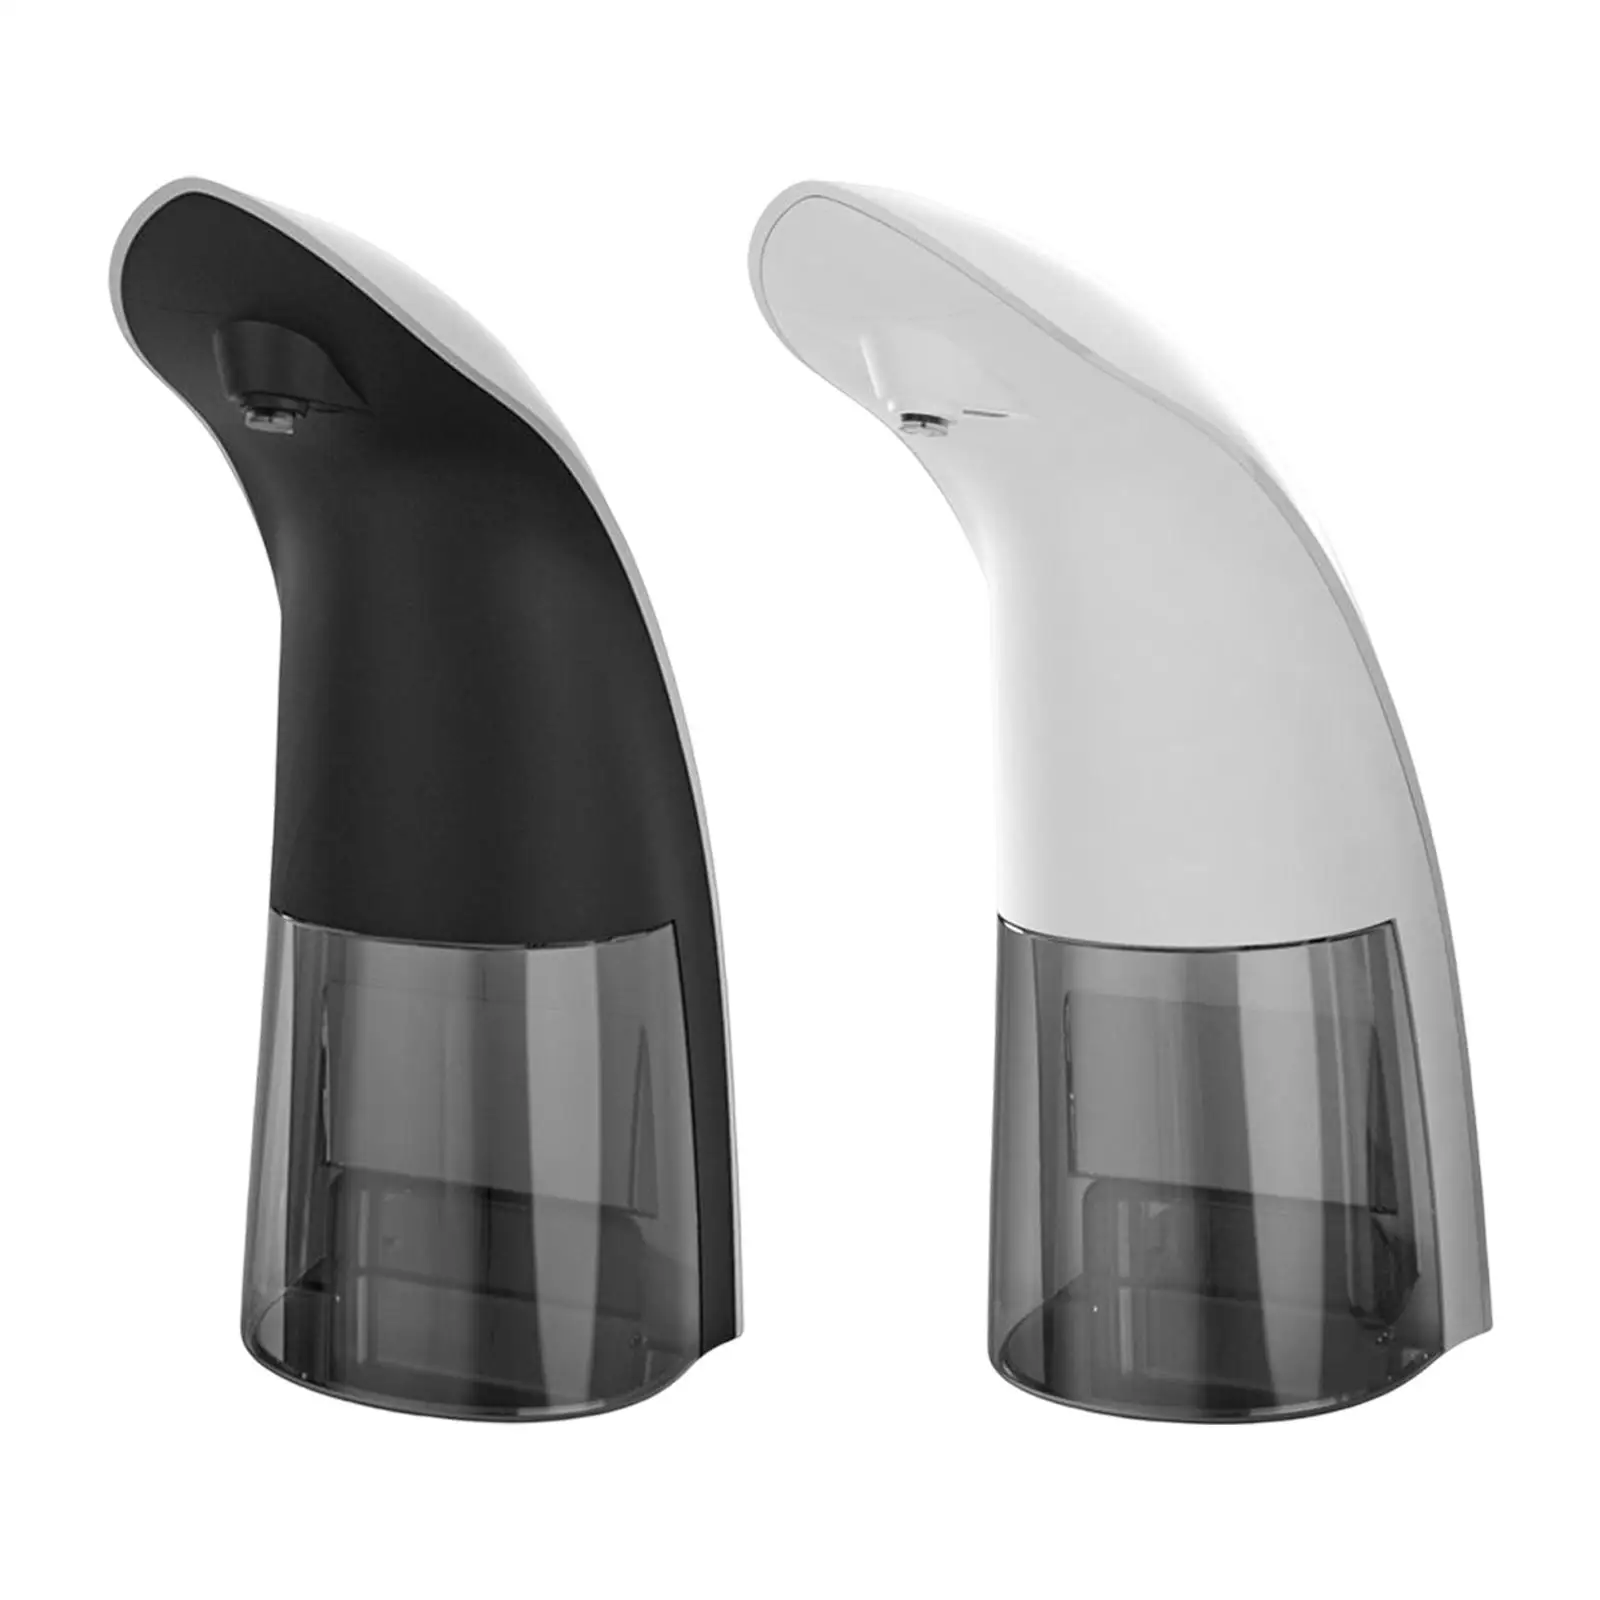 Automatic Liquid Soap Dispenser Hand Washer Tool Non Contact Touchless for Restaurant Kitchen Toilet Bathroom